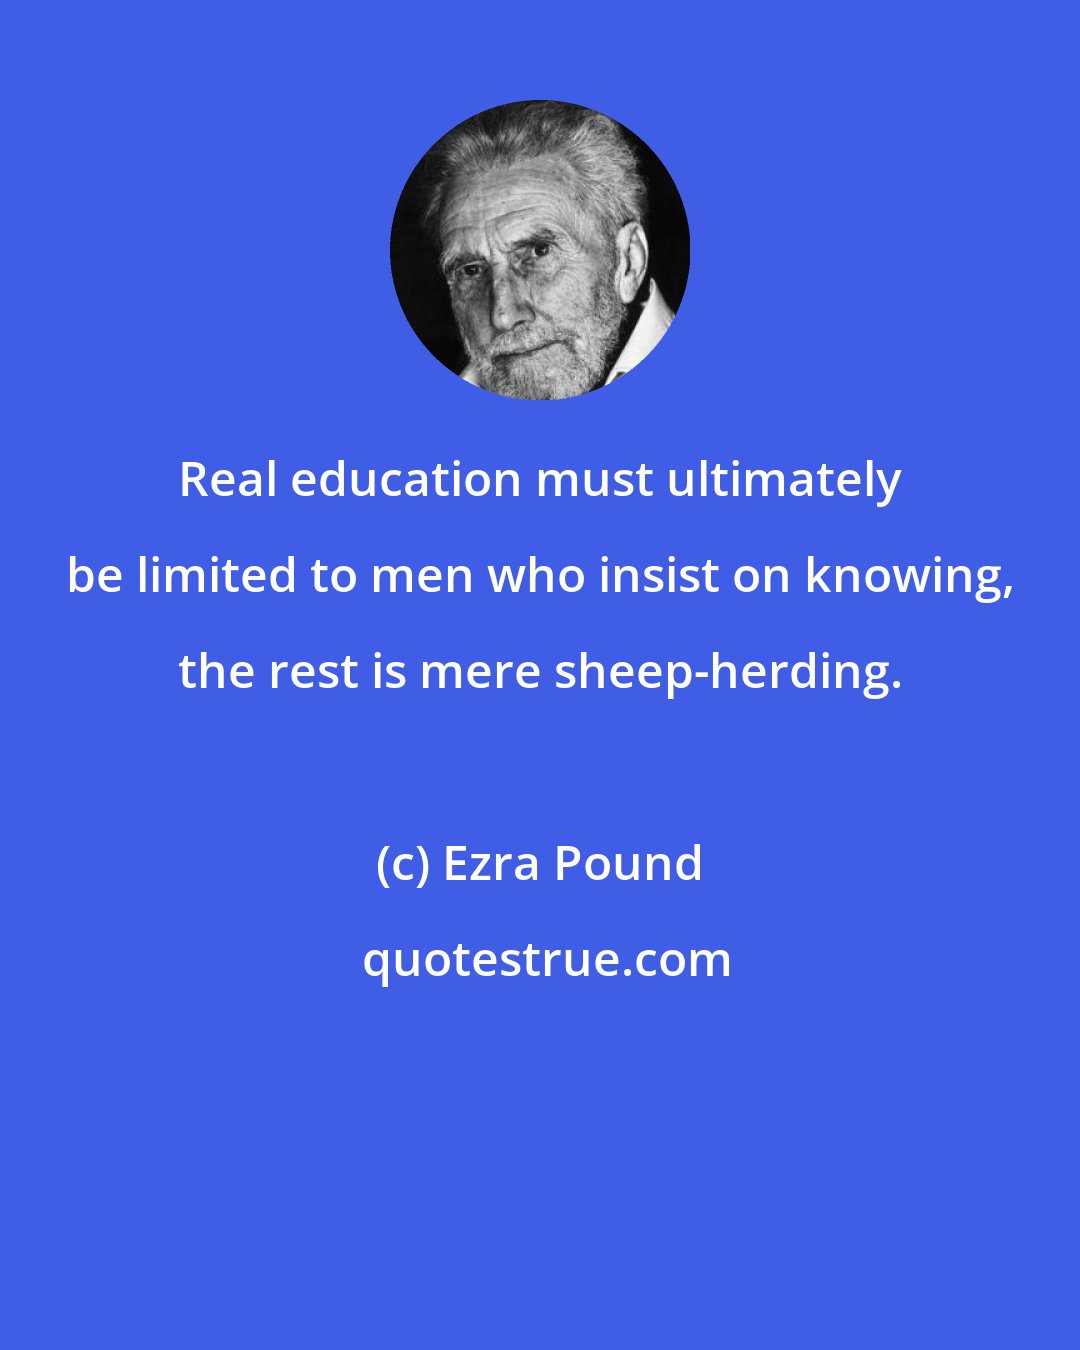 Ezra Pound: Real education must ultimately be limited to men who insist on knowing, the rest is mere sheep-herding.